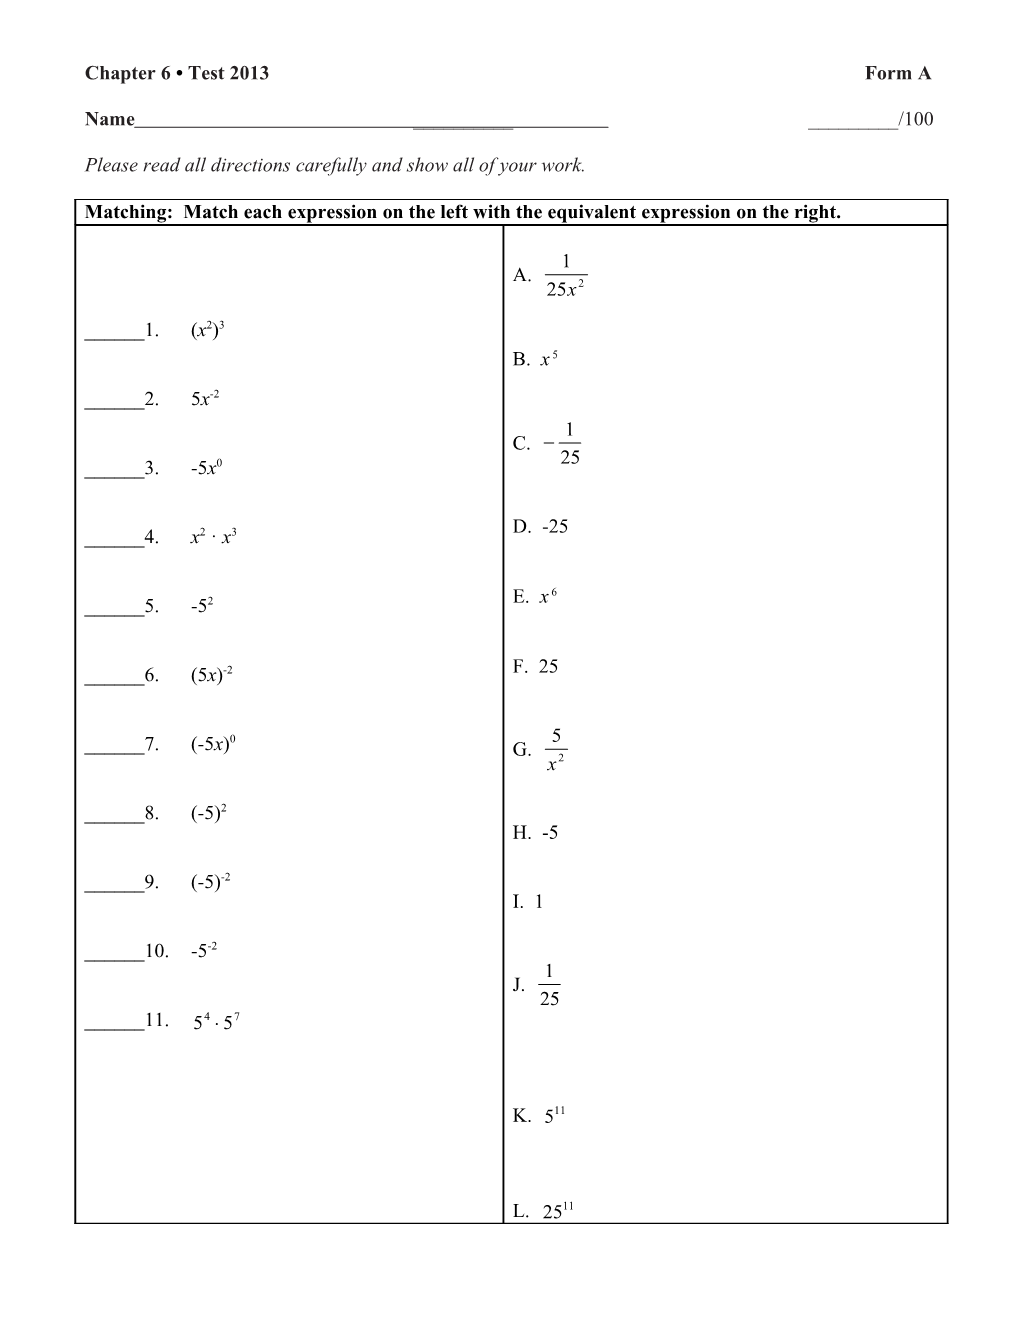 Chapter 6 Test 2013 Form A